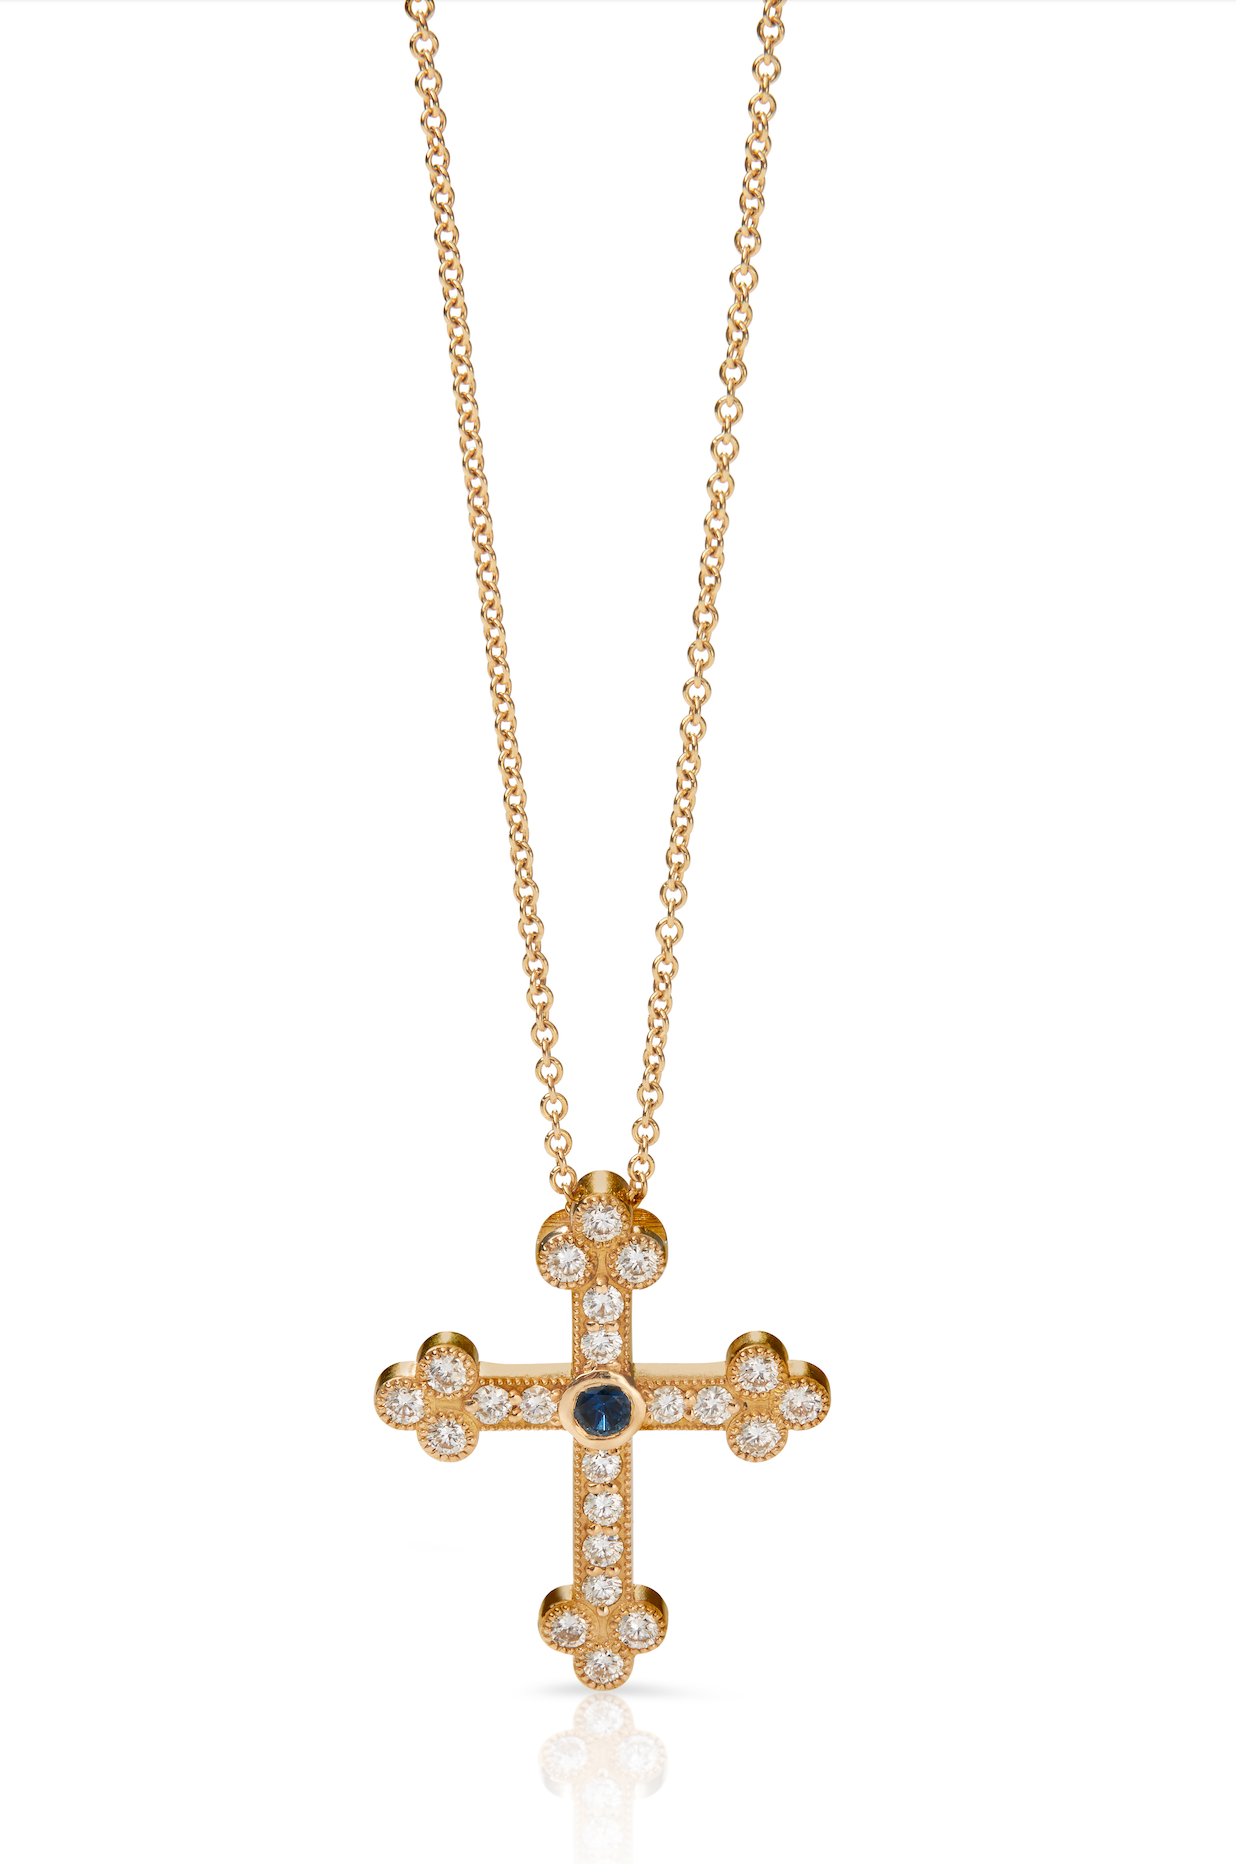 18KY Miriam Cross Necklace with Blue Sapphire